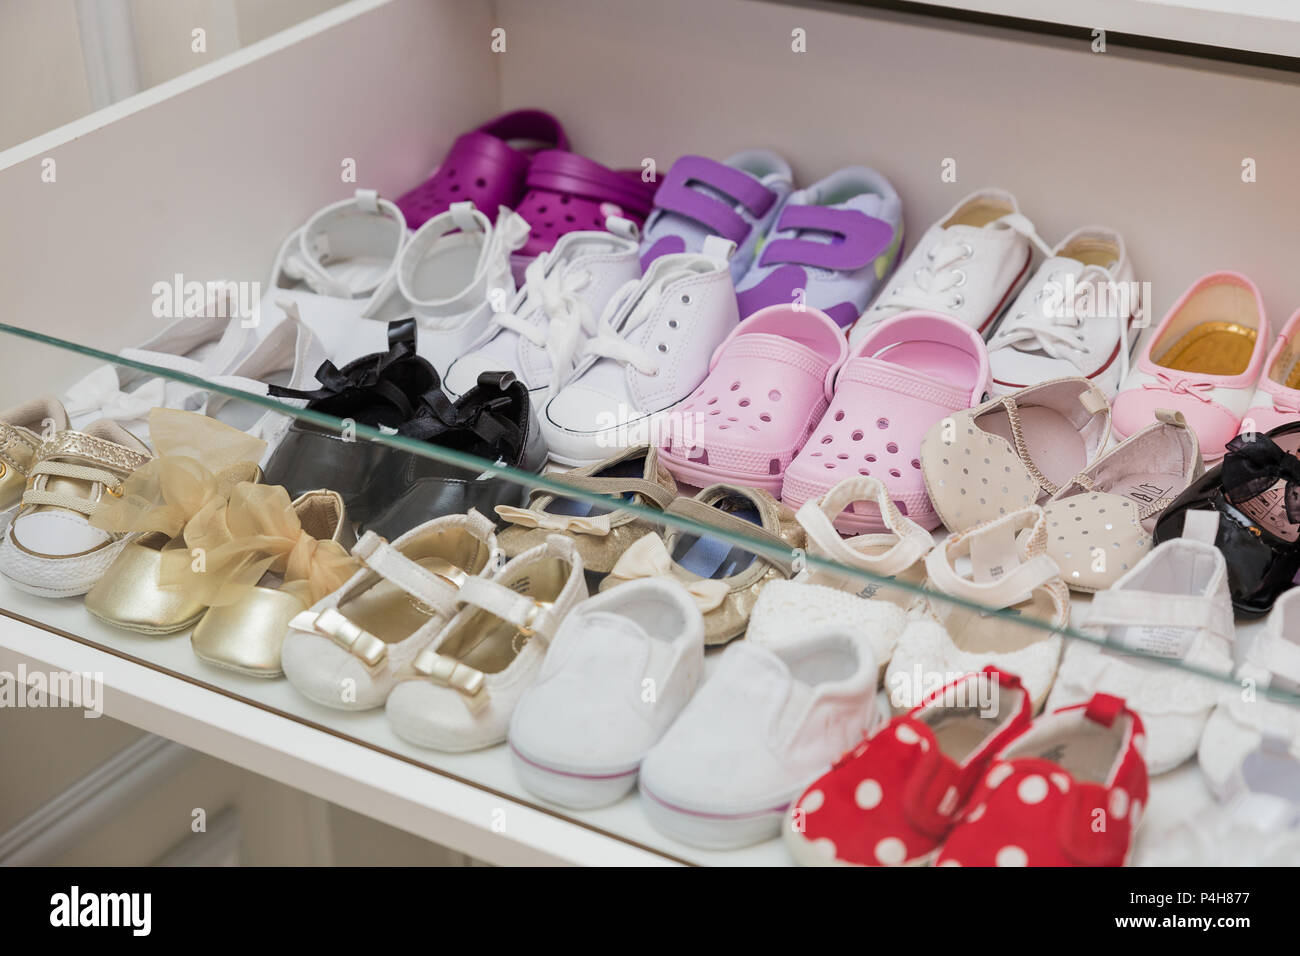 Baby Shoe Shop Near Online Sale, UP TO 58% OFF